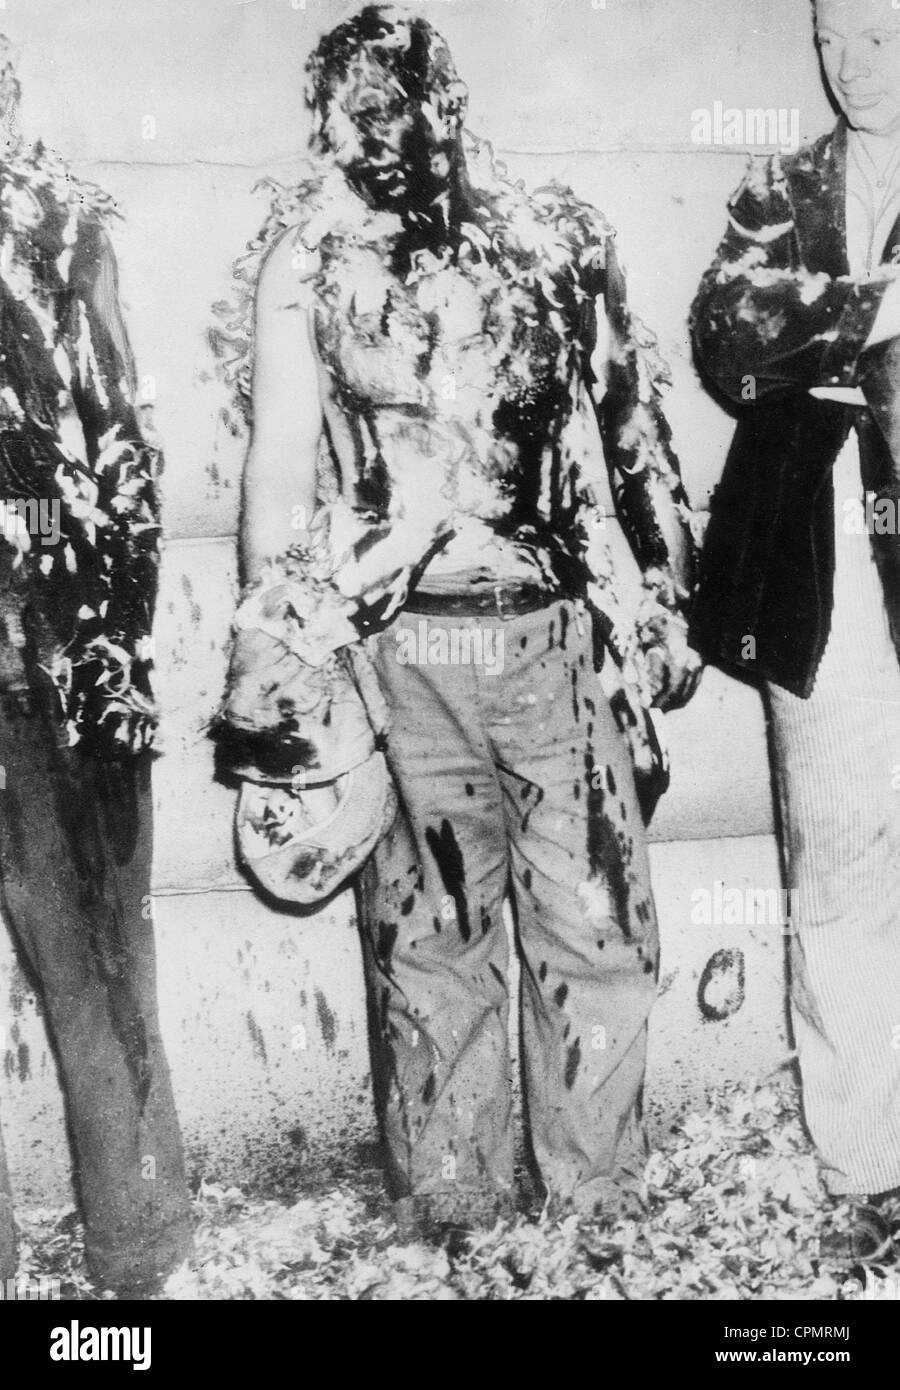 Tarred and feathered Communists in Santa Rosa, 1935 Stock Photo